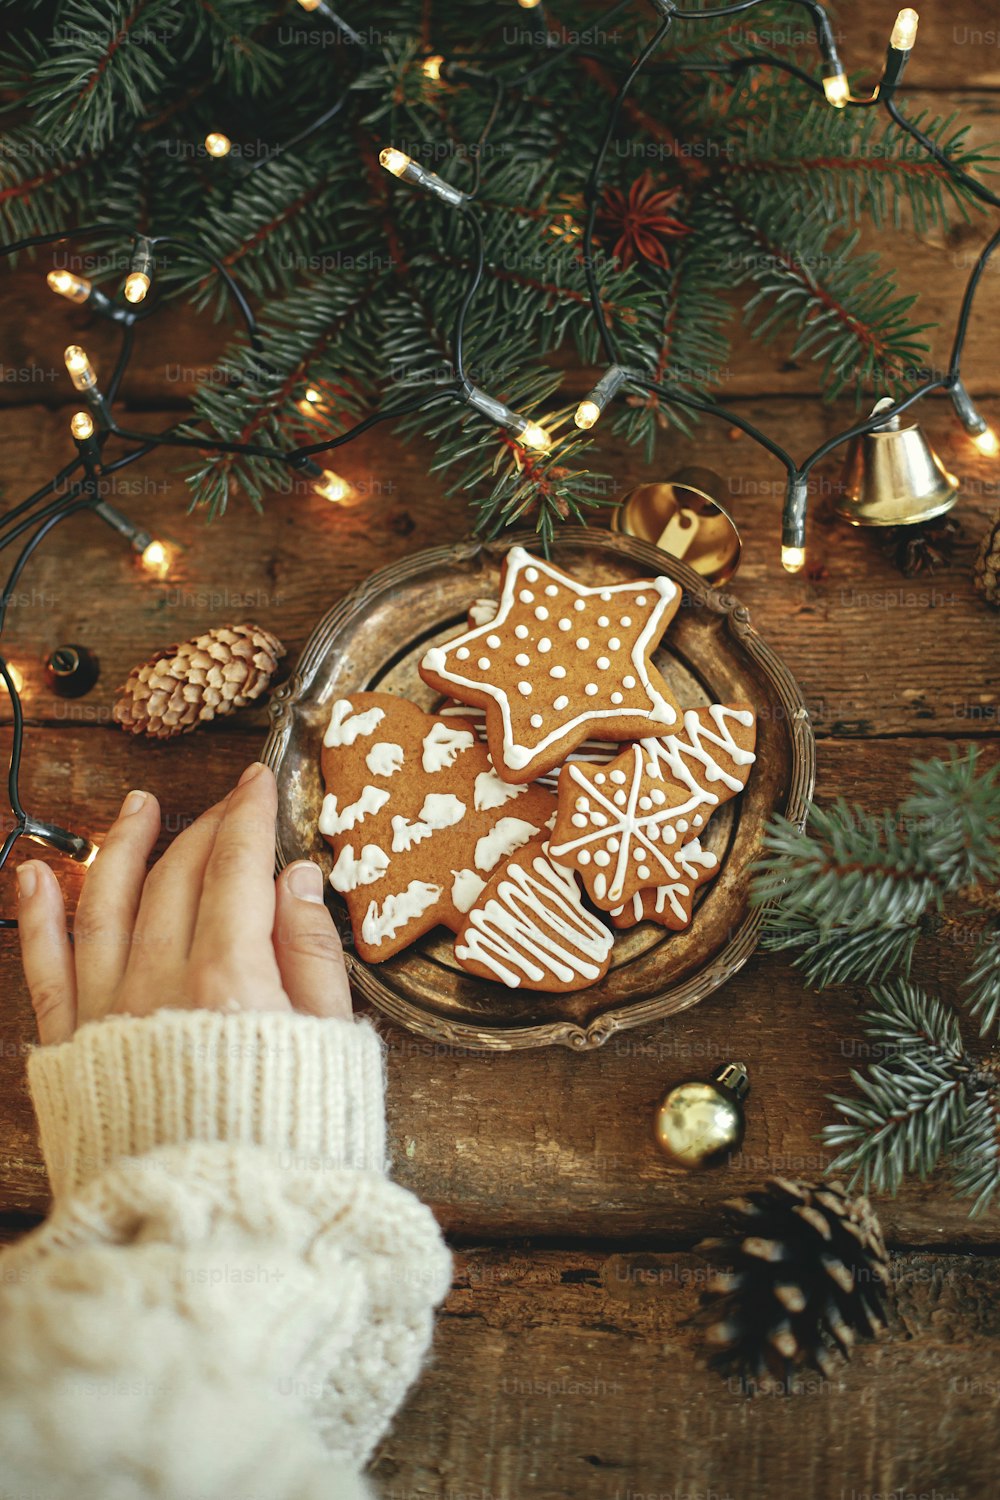 Hand holding plate with christmas gingerbread cookies, fir branches , warm lights on rustic wooden table, flat lay. Atmospheric winter image. Seasons greeting. Delicious homemade cookies